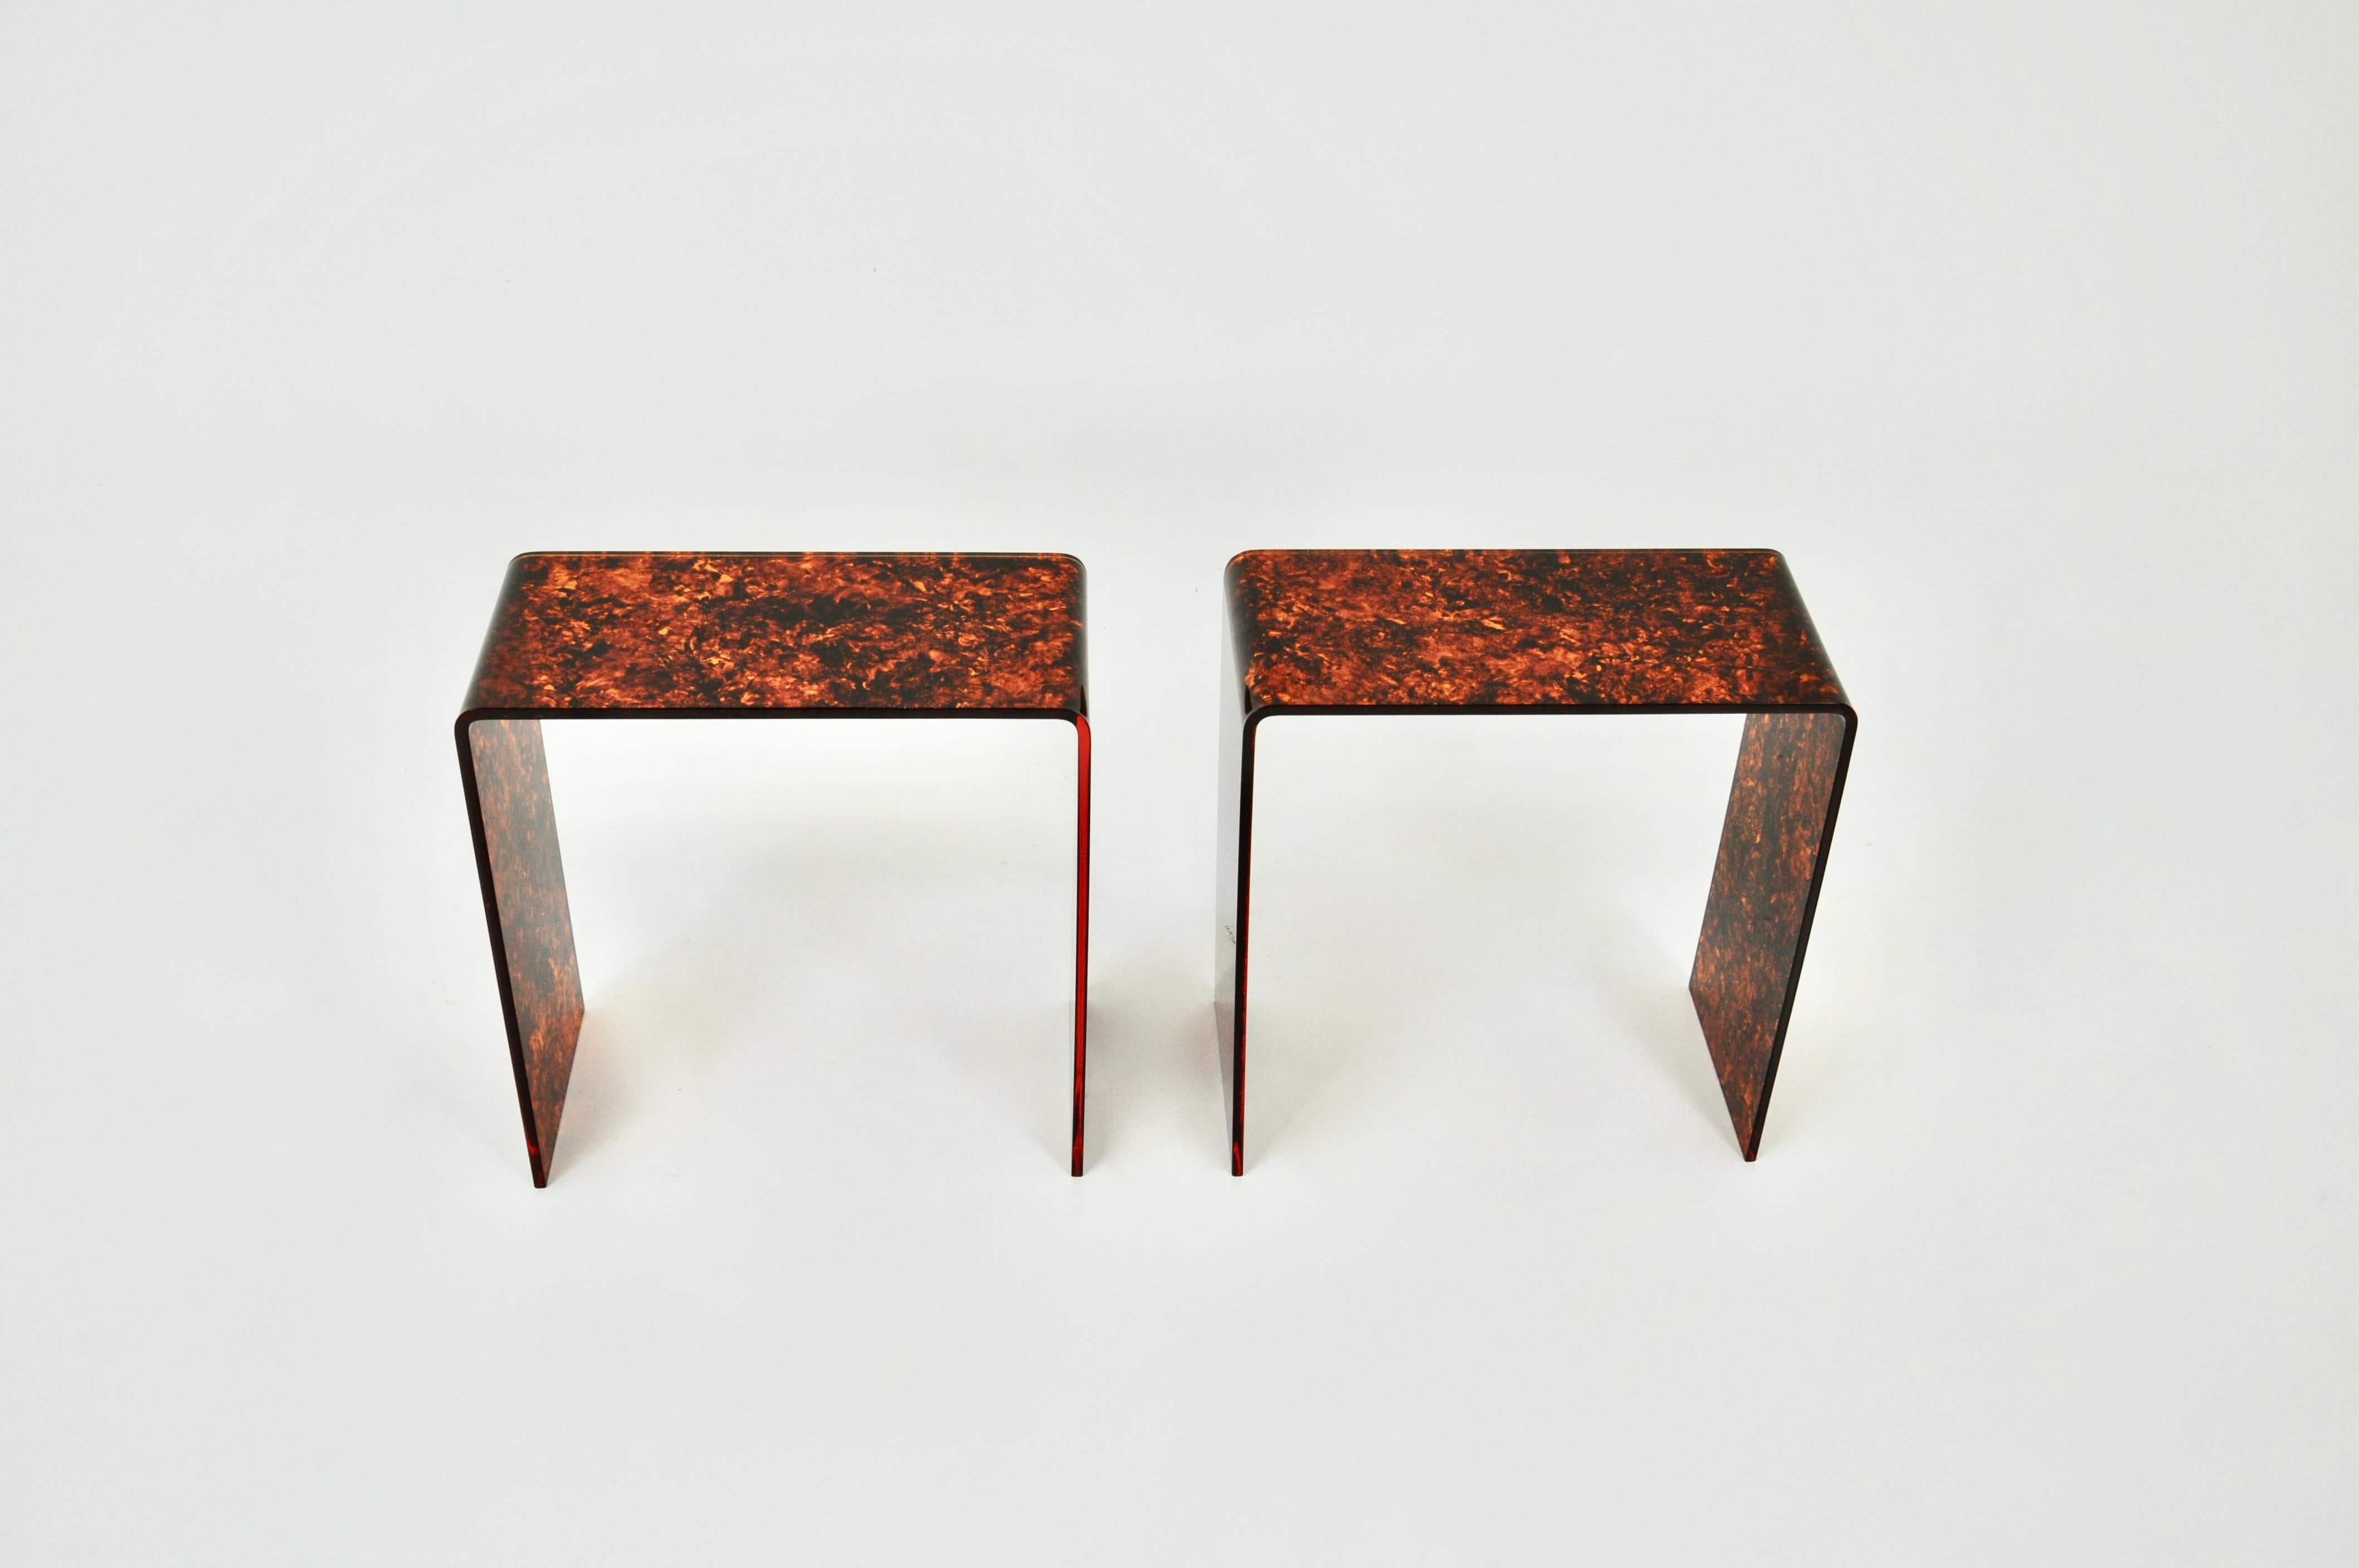 Pair of Italian methacrylate side tables in the style of Christian Dior. Wear due to time and age of the tables.